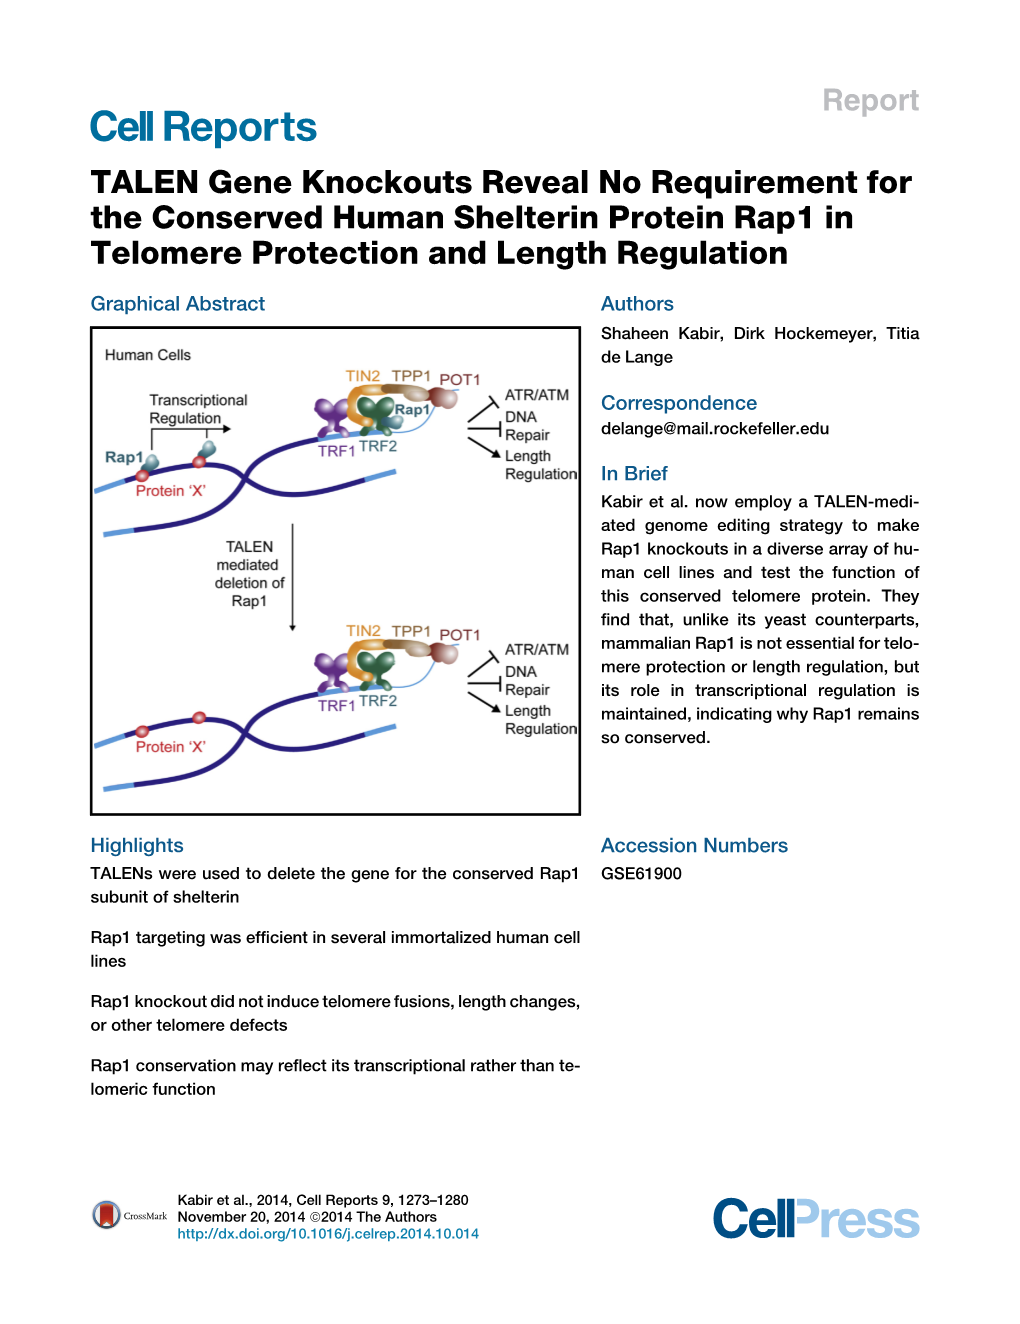 TALEN Gene Knockouts Reveal No Requirement for the Conserved Human Shelterin Protein Rap1 in Telomere Protection and Length Regulation